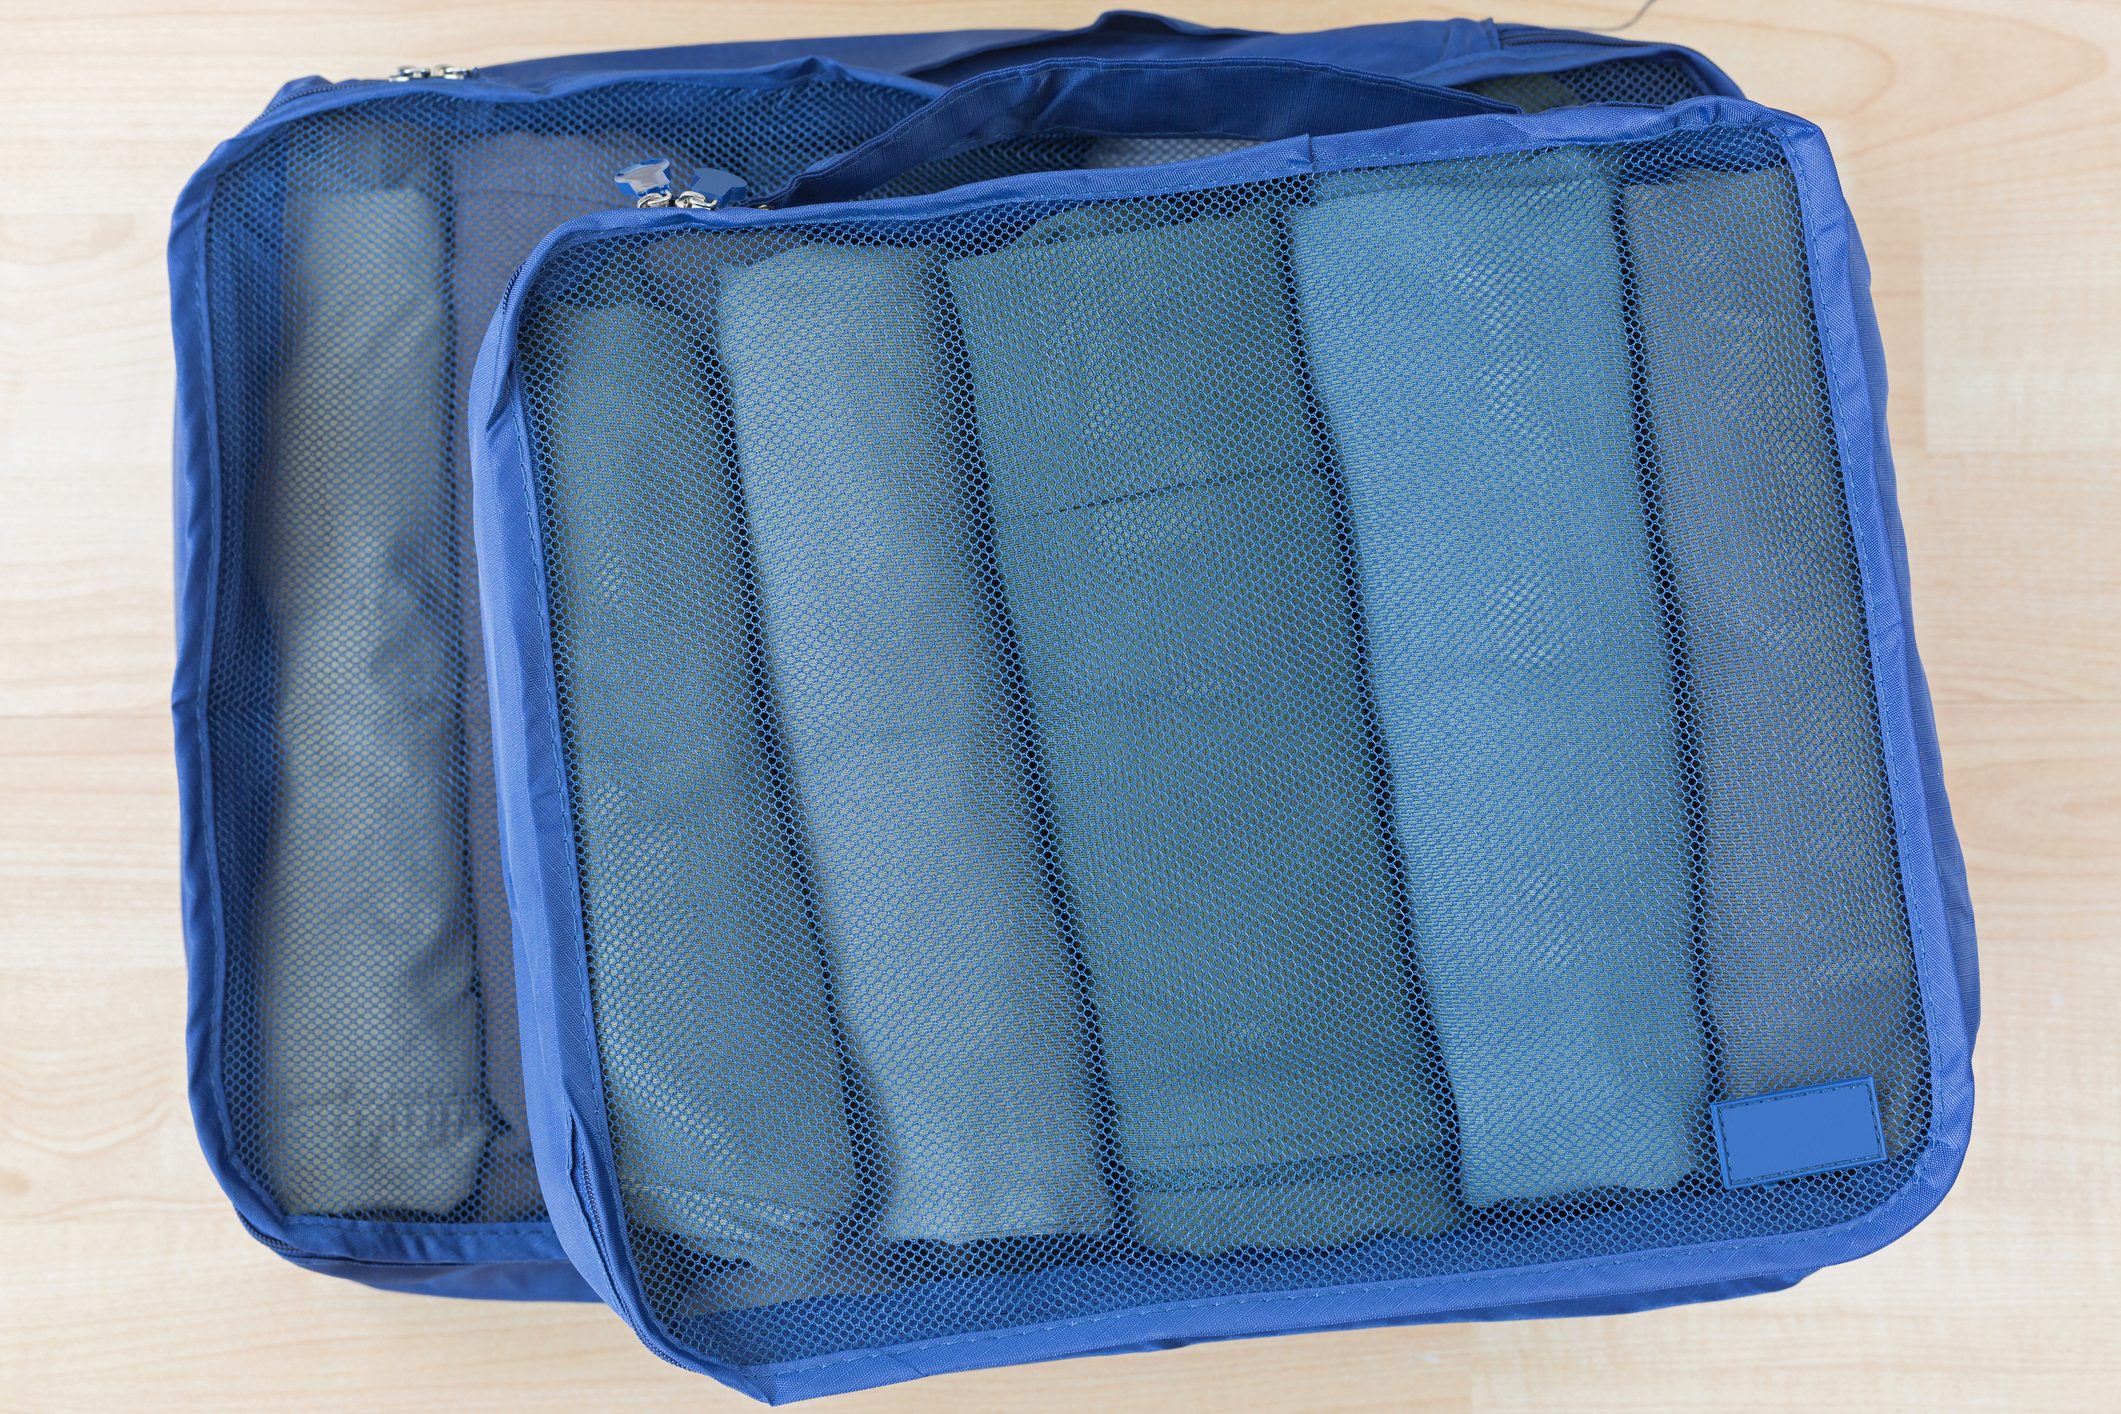 How to Use Packing Cubes to Save Space